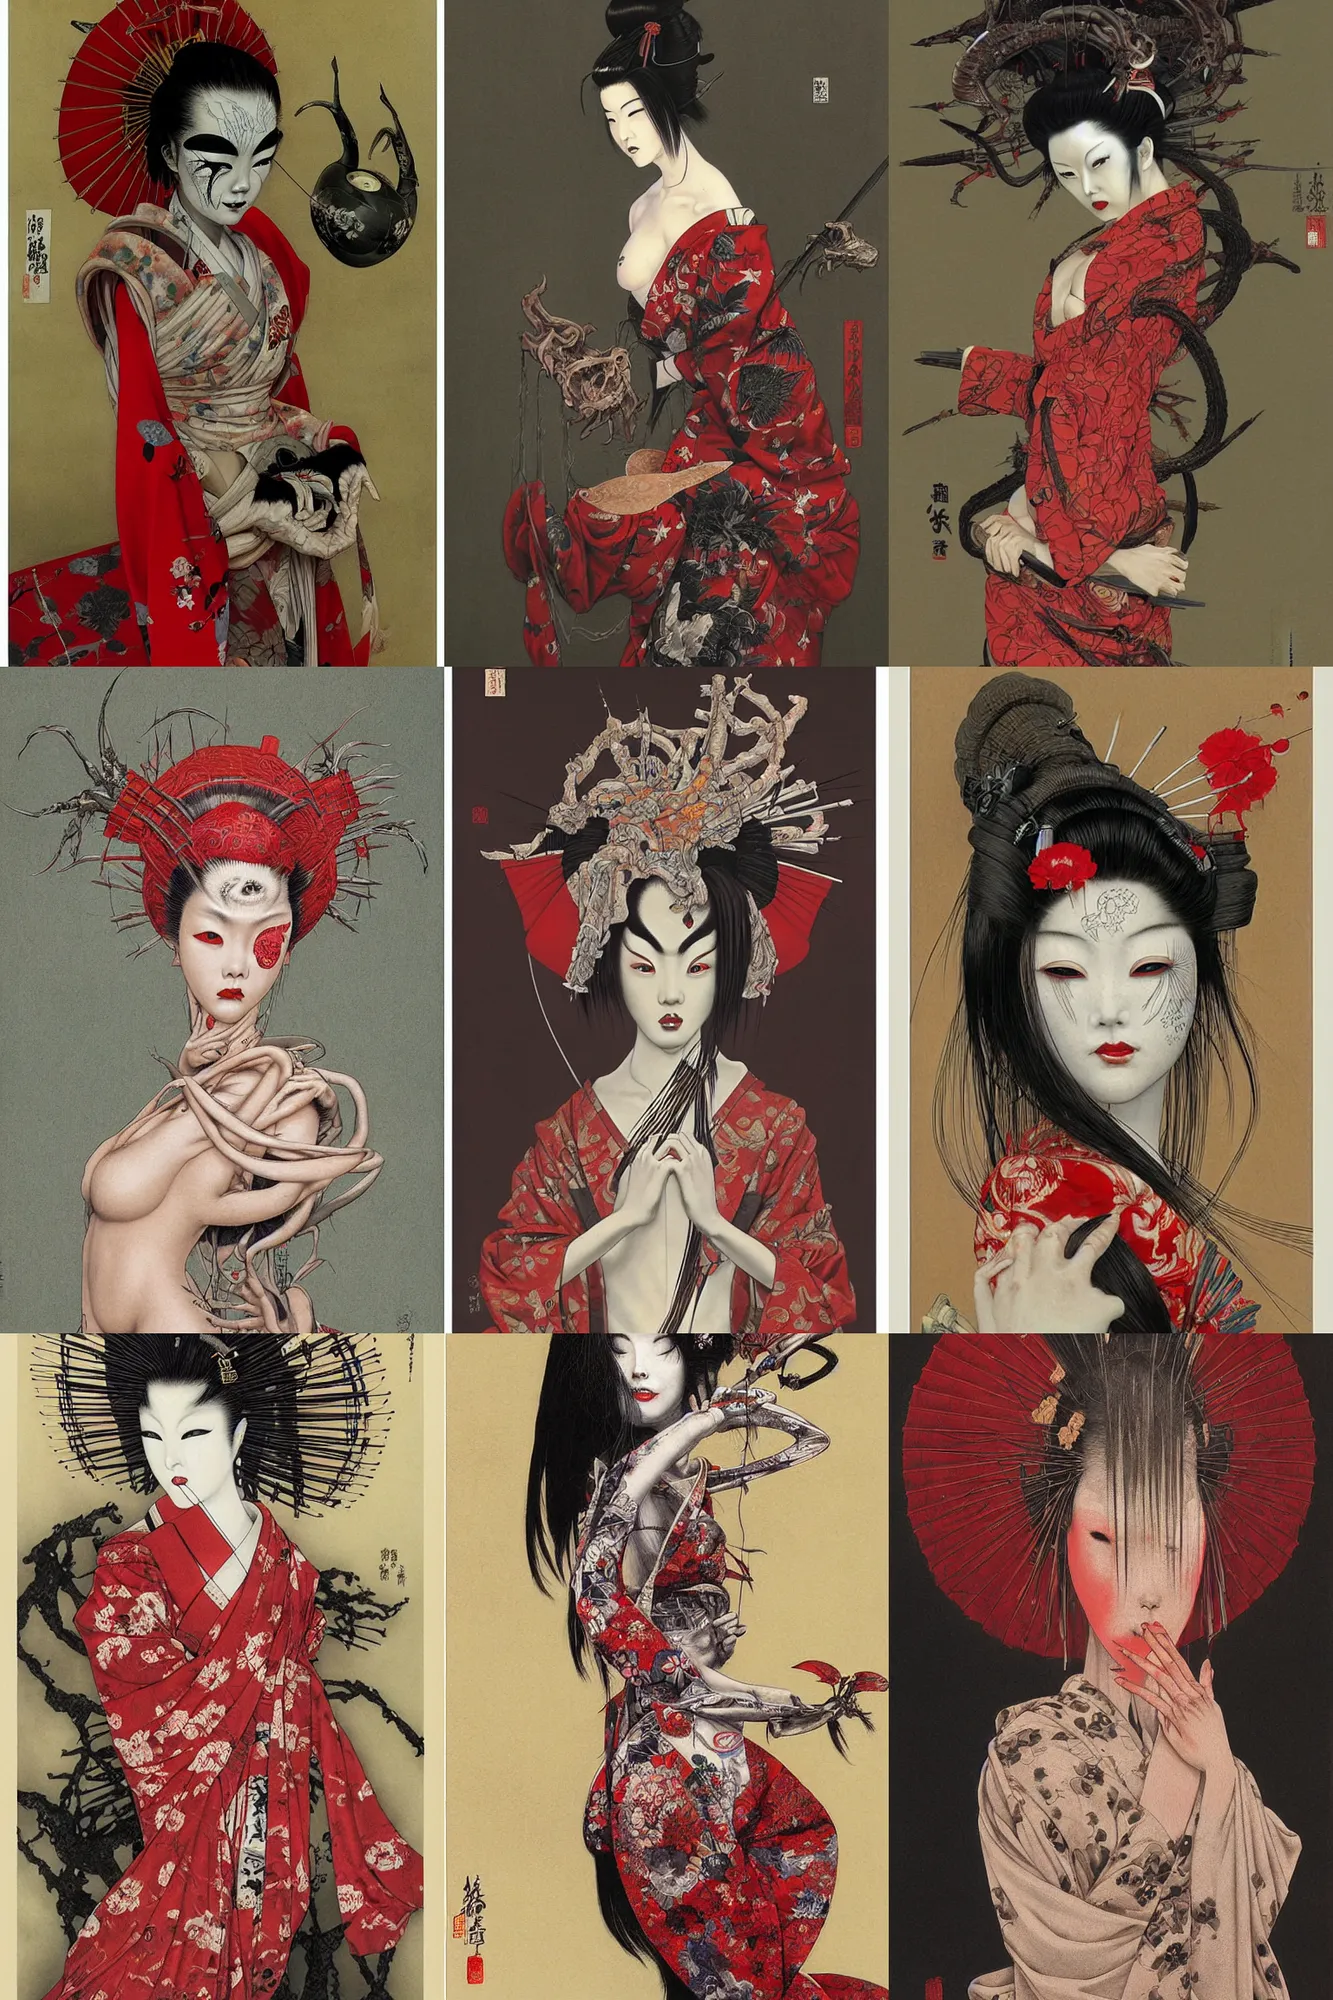 Prompt: painting of a geisha by brain froud, dave dorman, takato yamamoto, h. r. giger, red